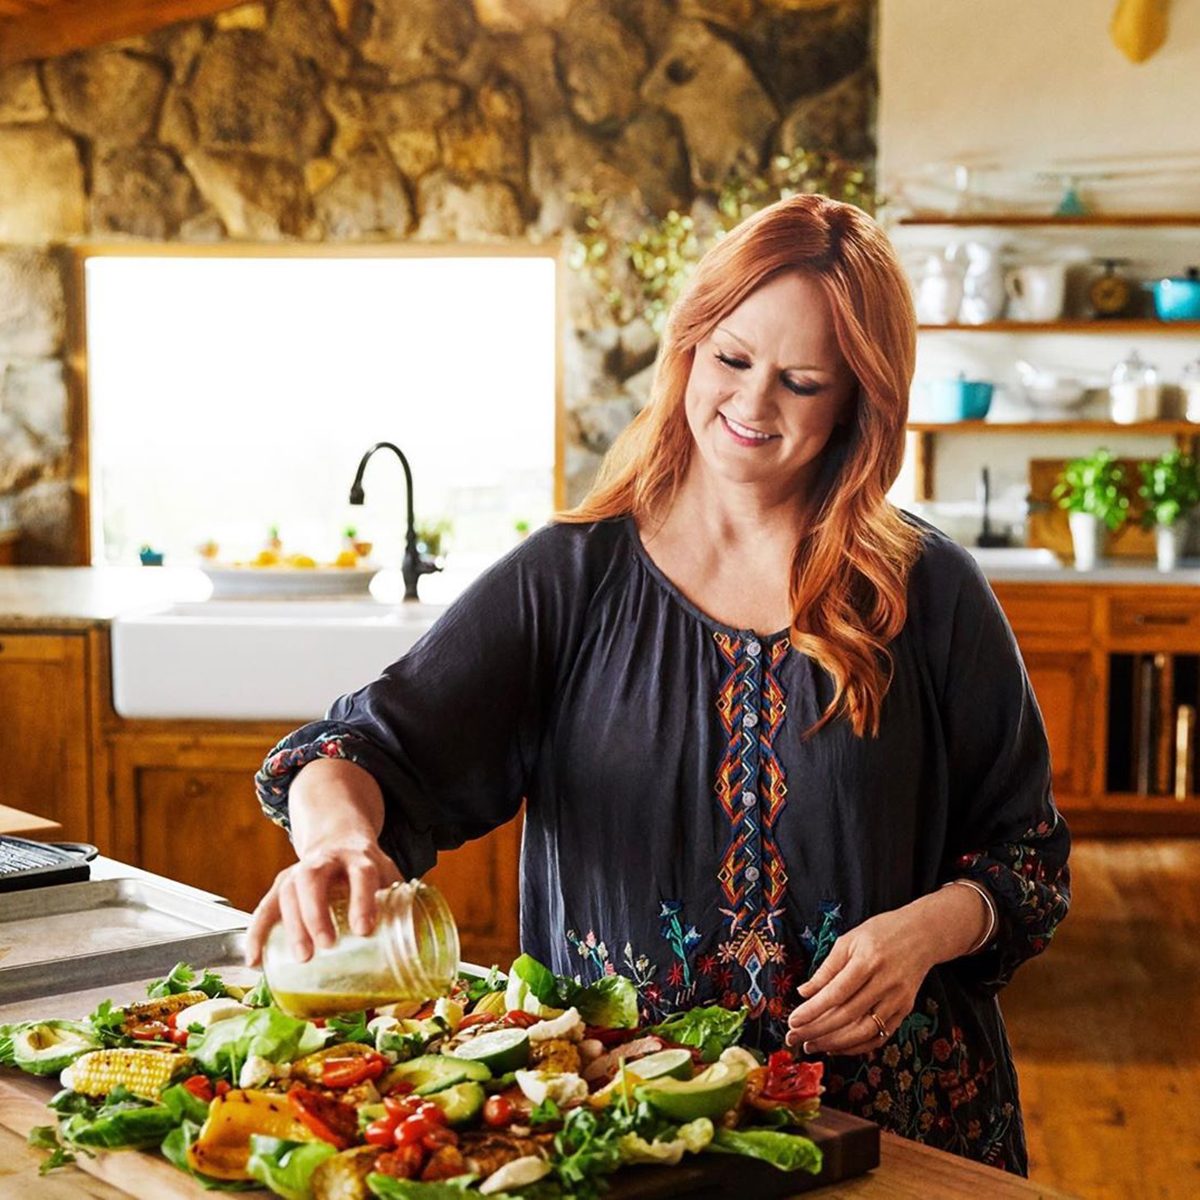 If Ree Drummond Had to Choose a Last Meal, This Would Be It